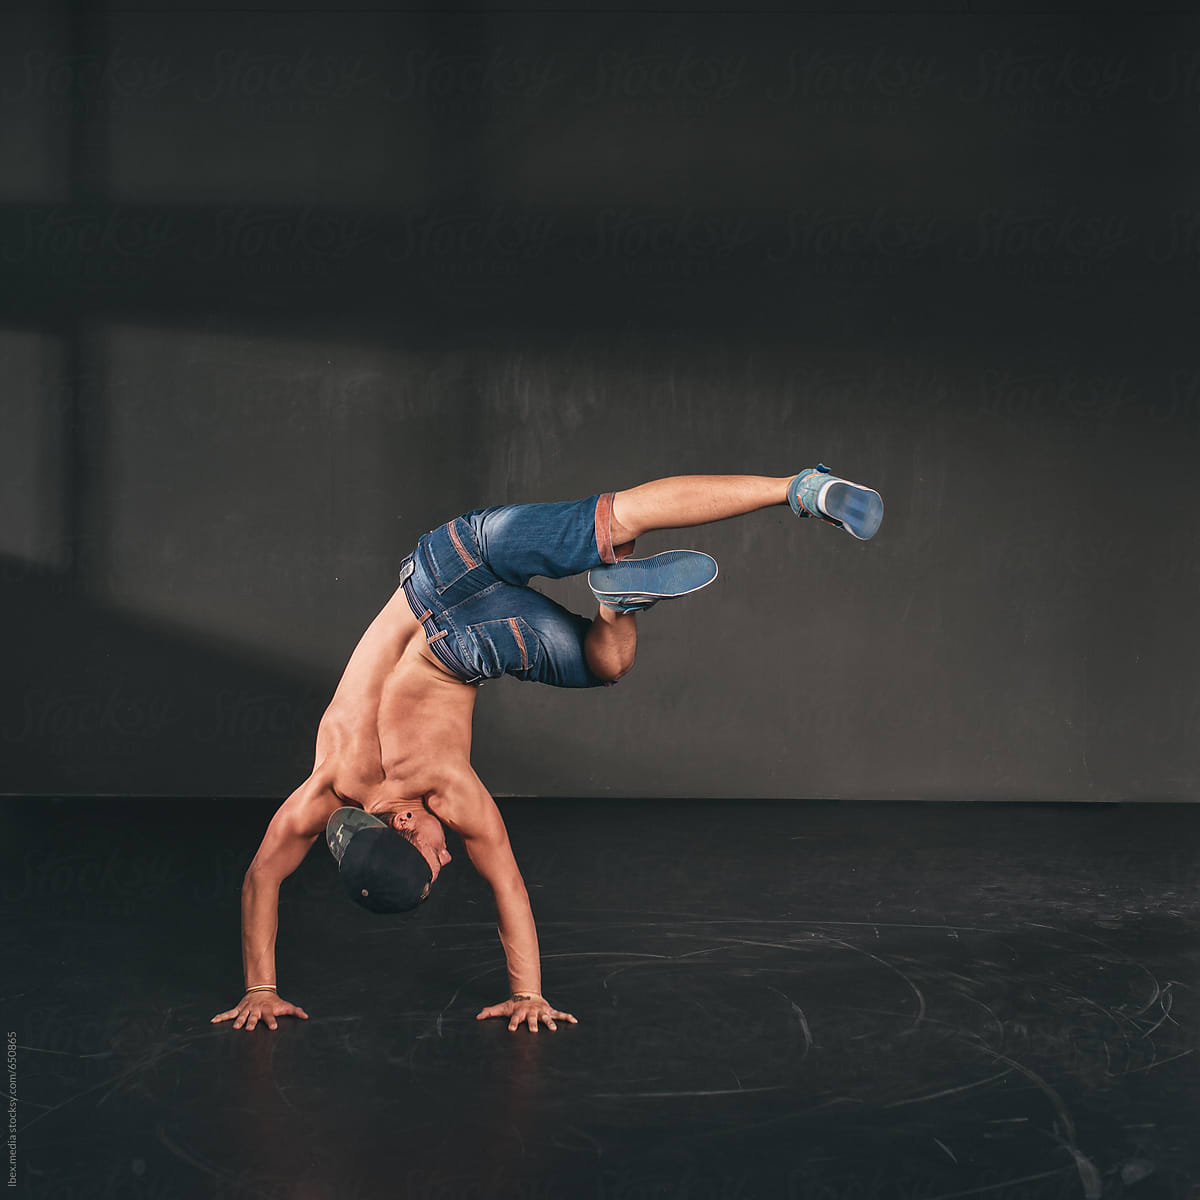 Break dancer posing with his feet up in the air